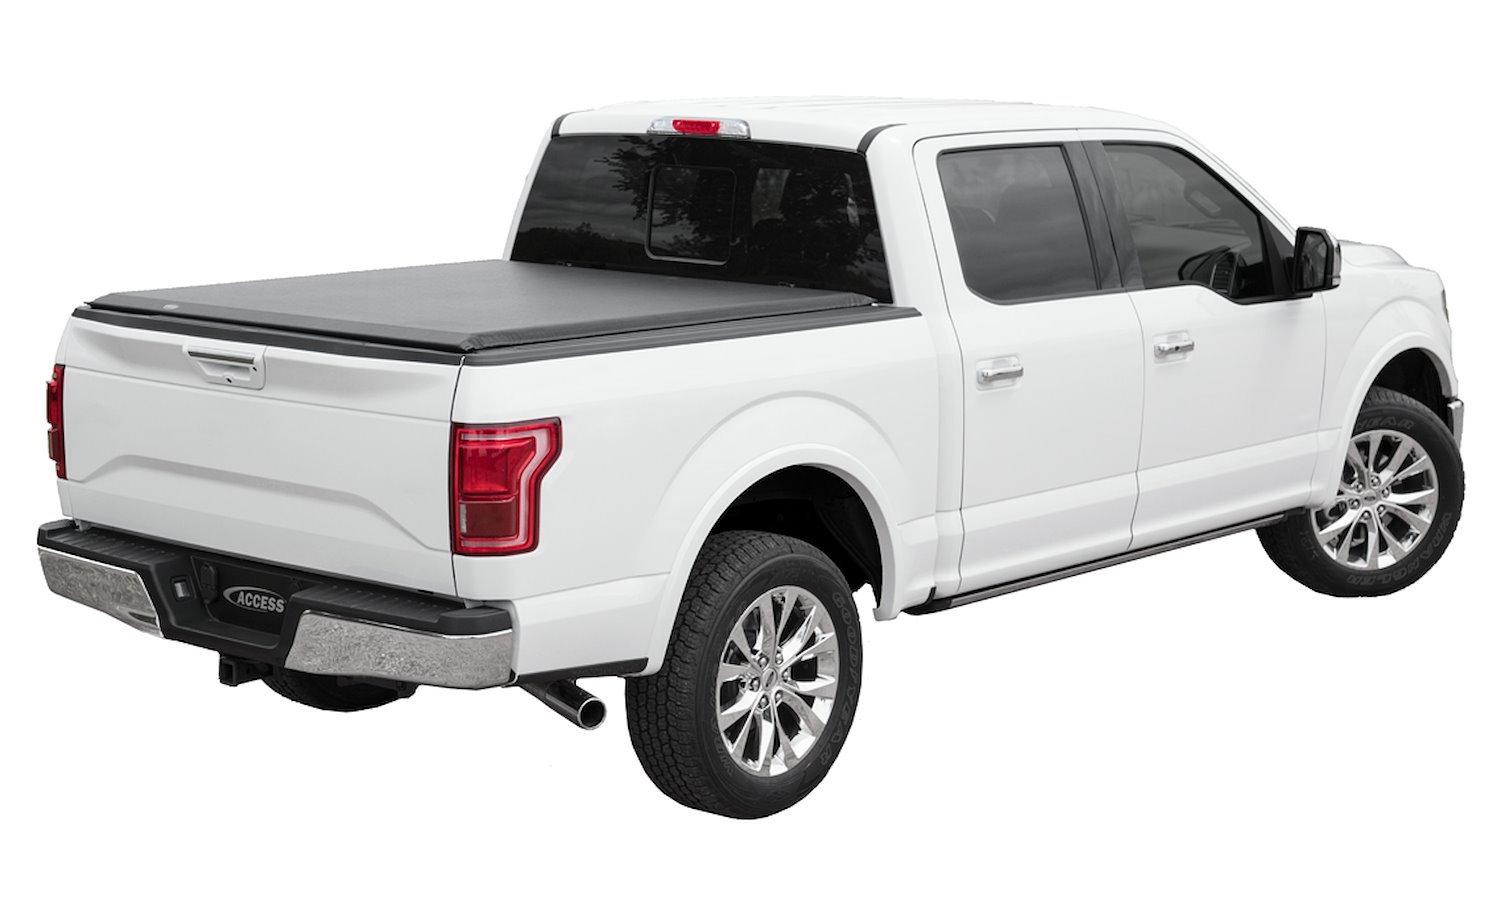 Original Roll-Up Tonneau Cover, 2004-2014 Ford F-150, 2007-2008 Lincoln Mark LT, with 6 ft. 6 in. Bed